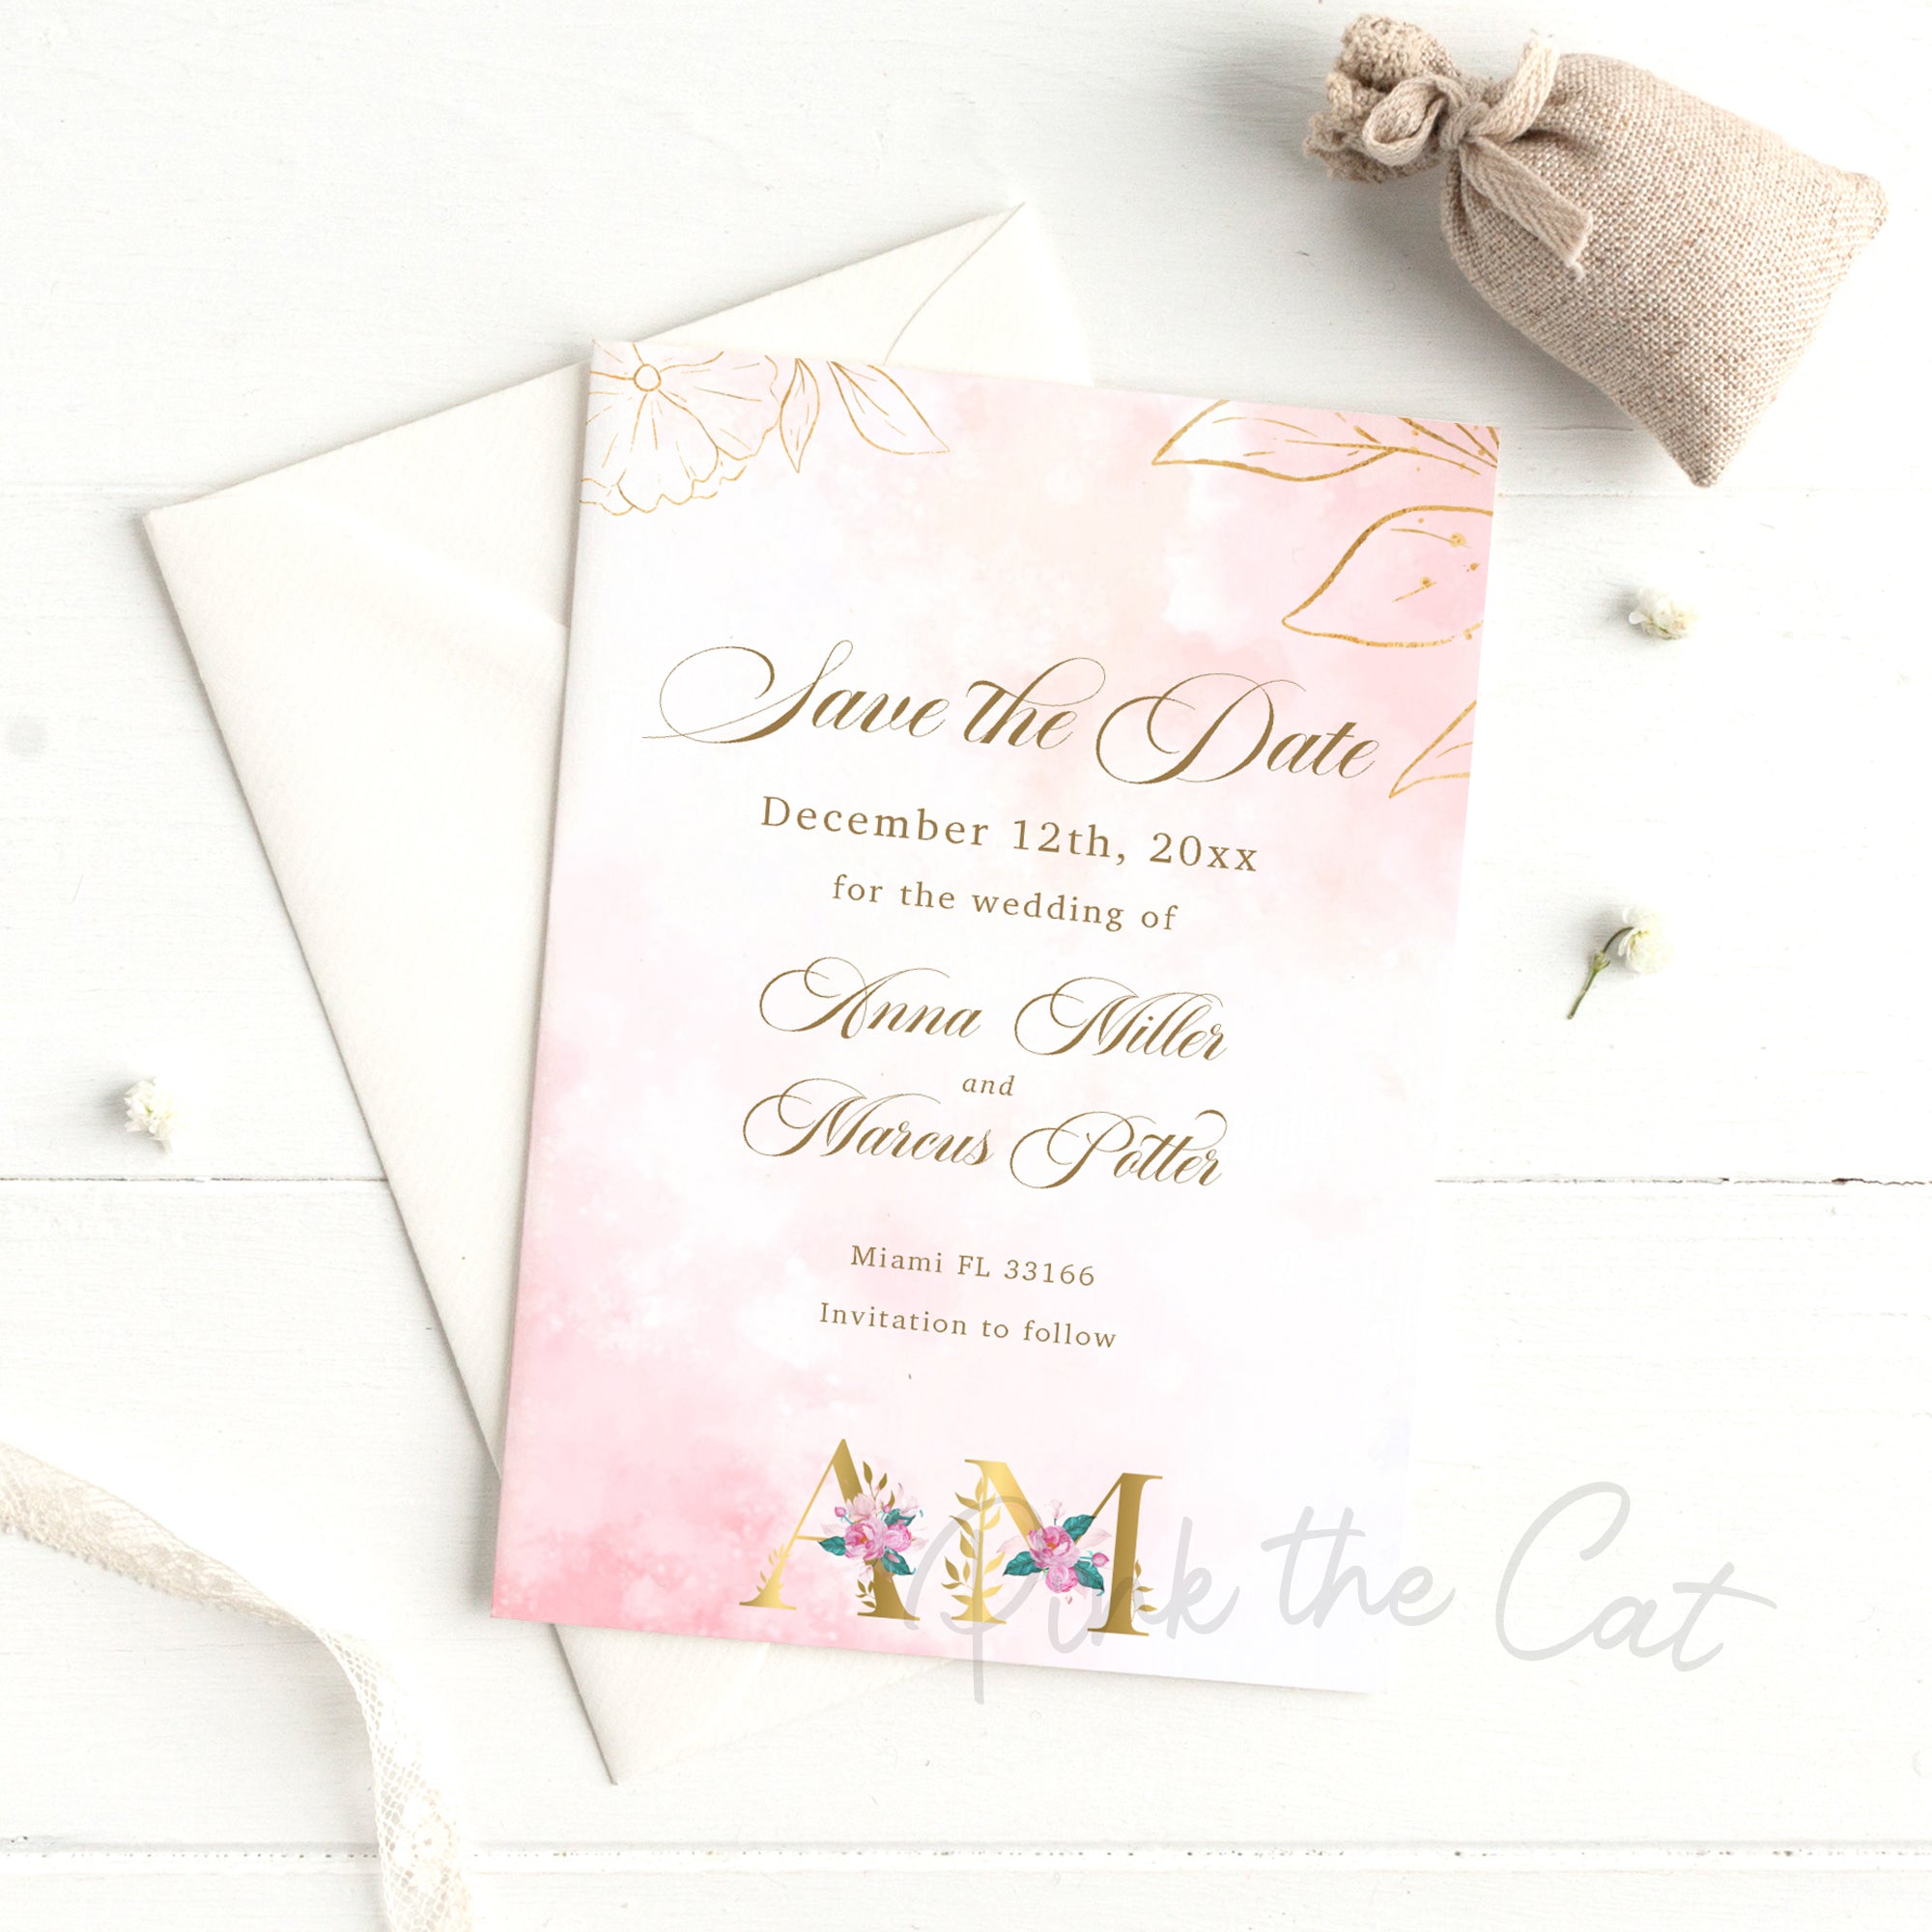 Monogram save the date card